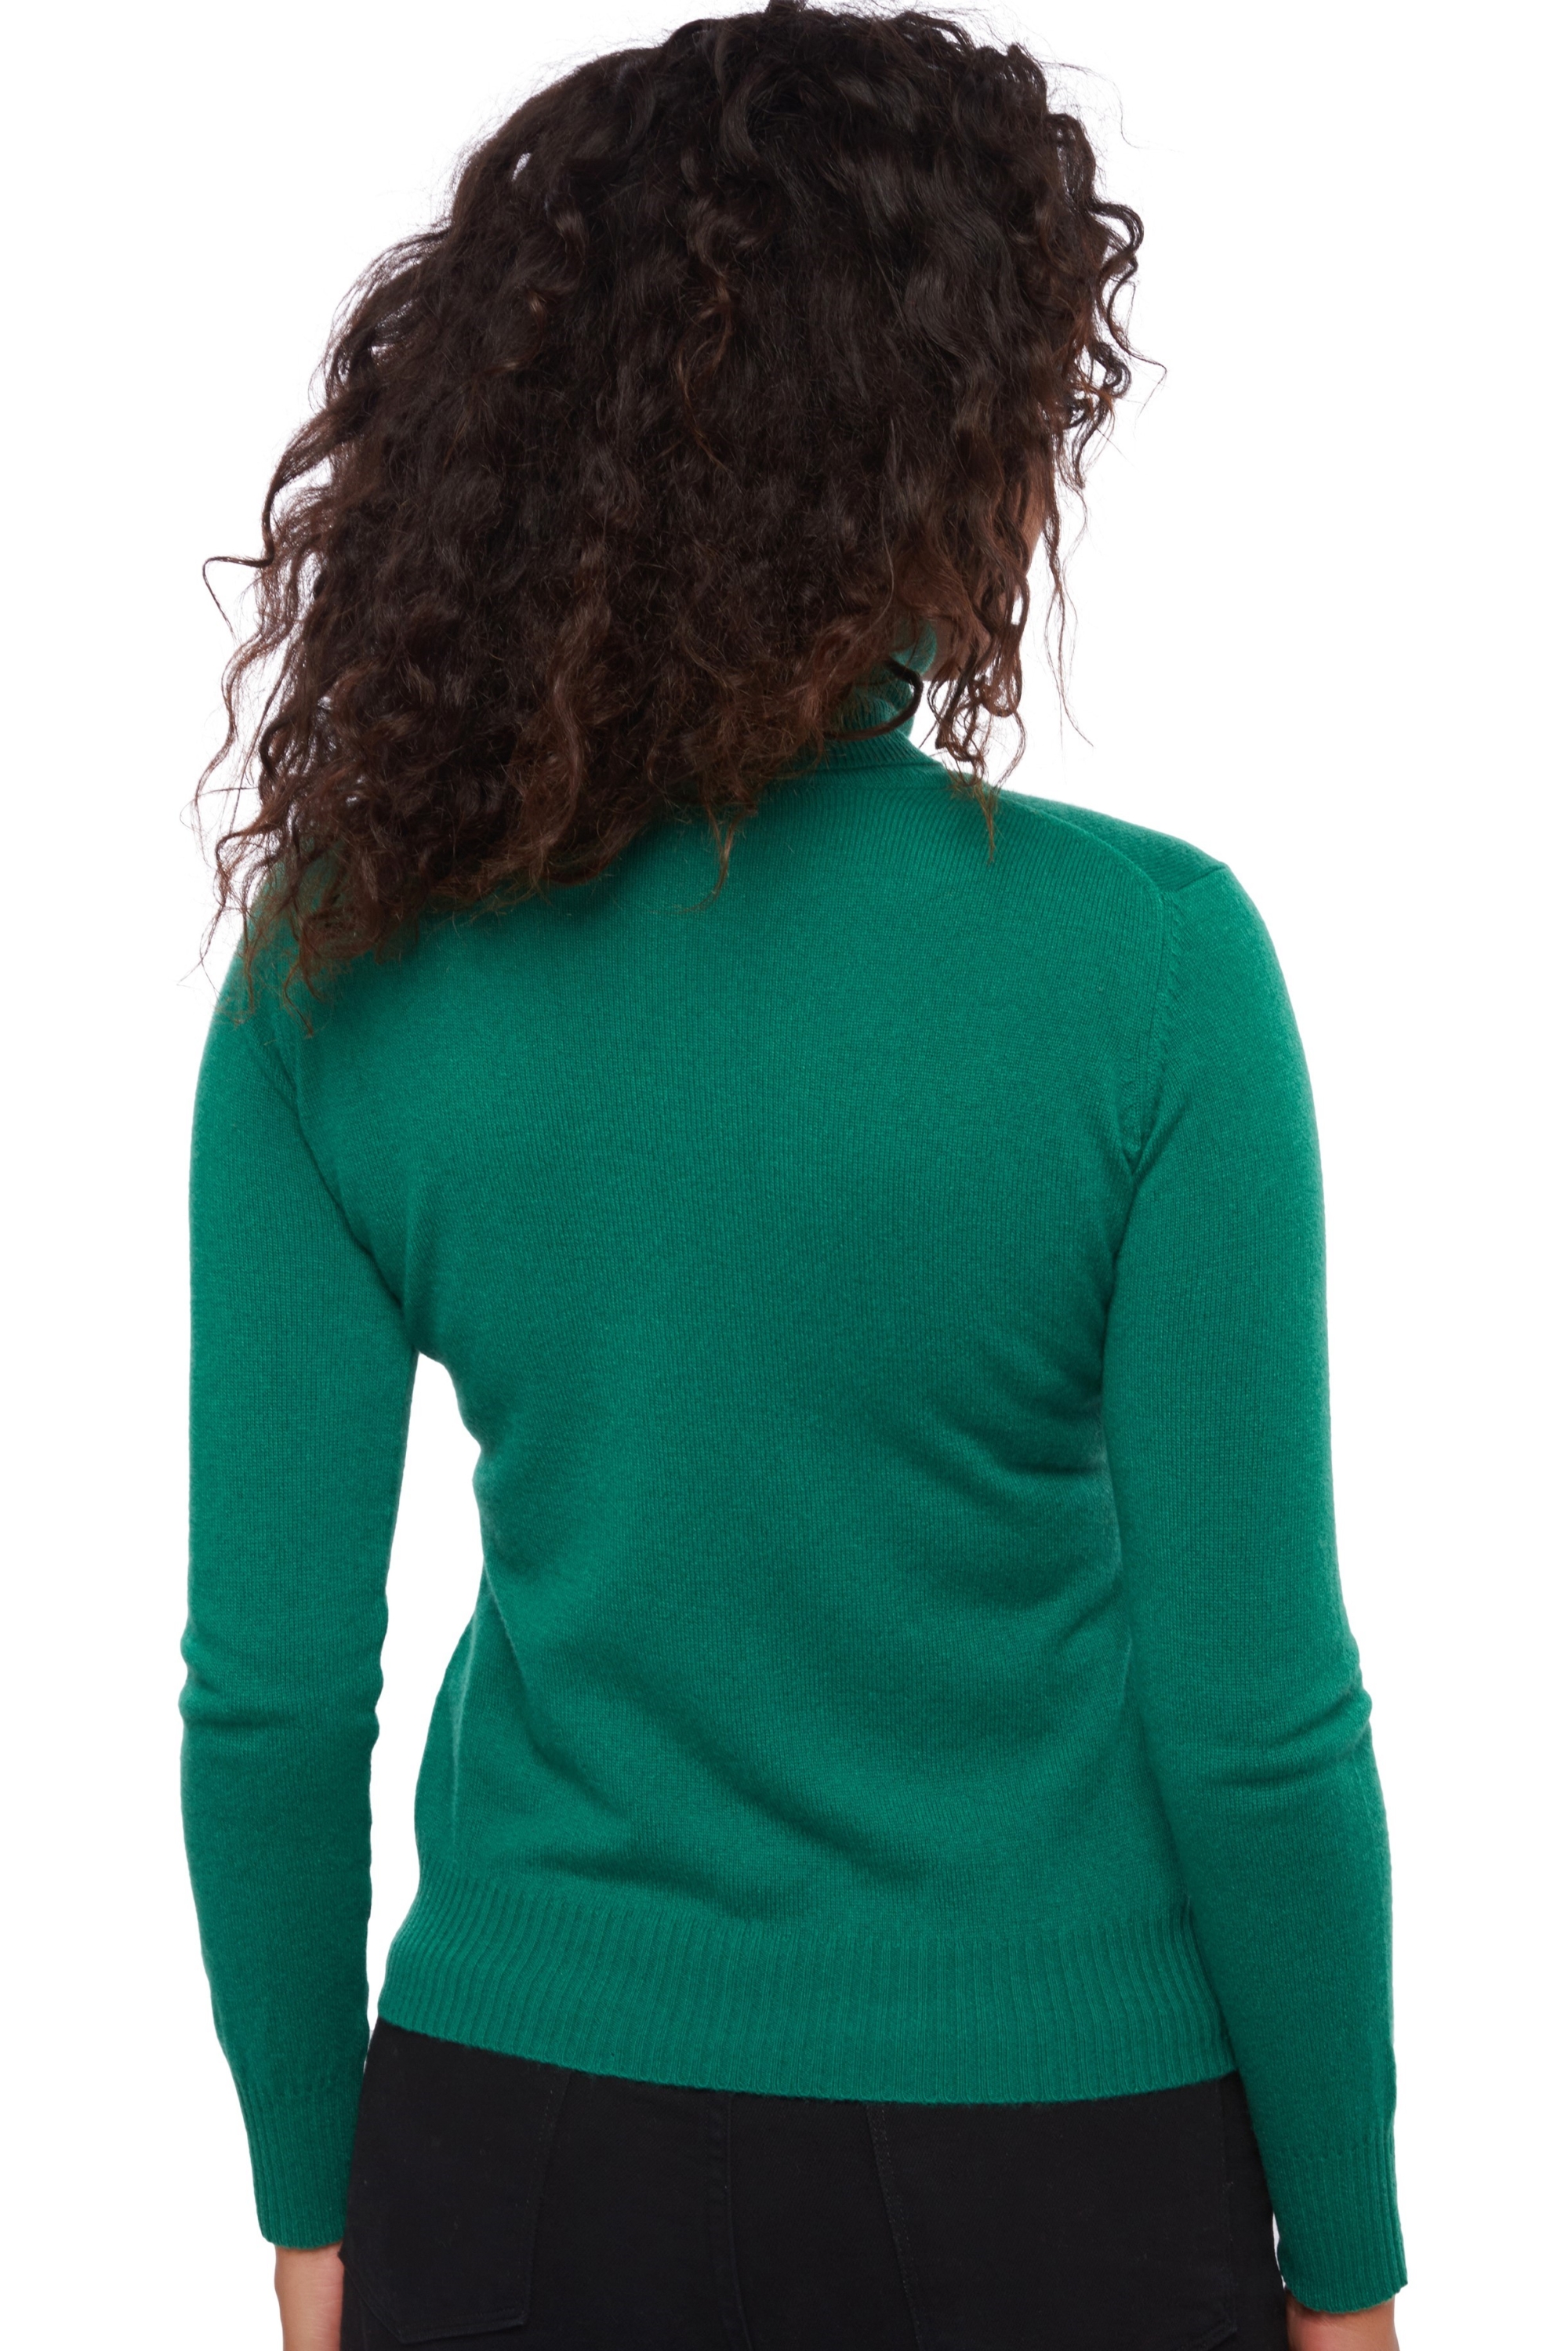 Cachemire pull femme col roule lili vert anglais s